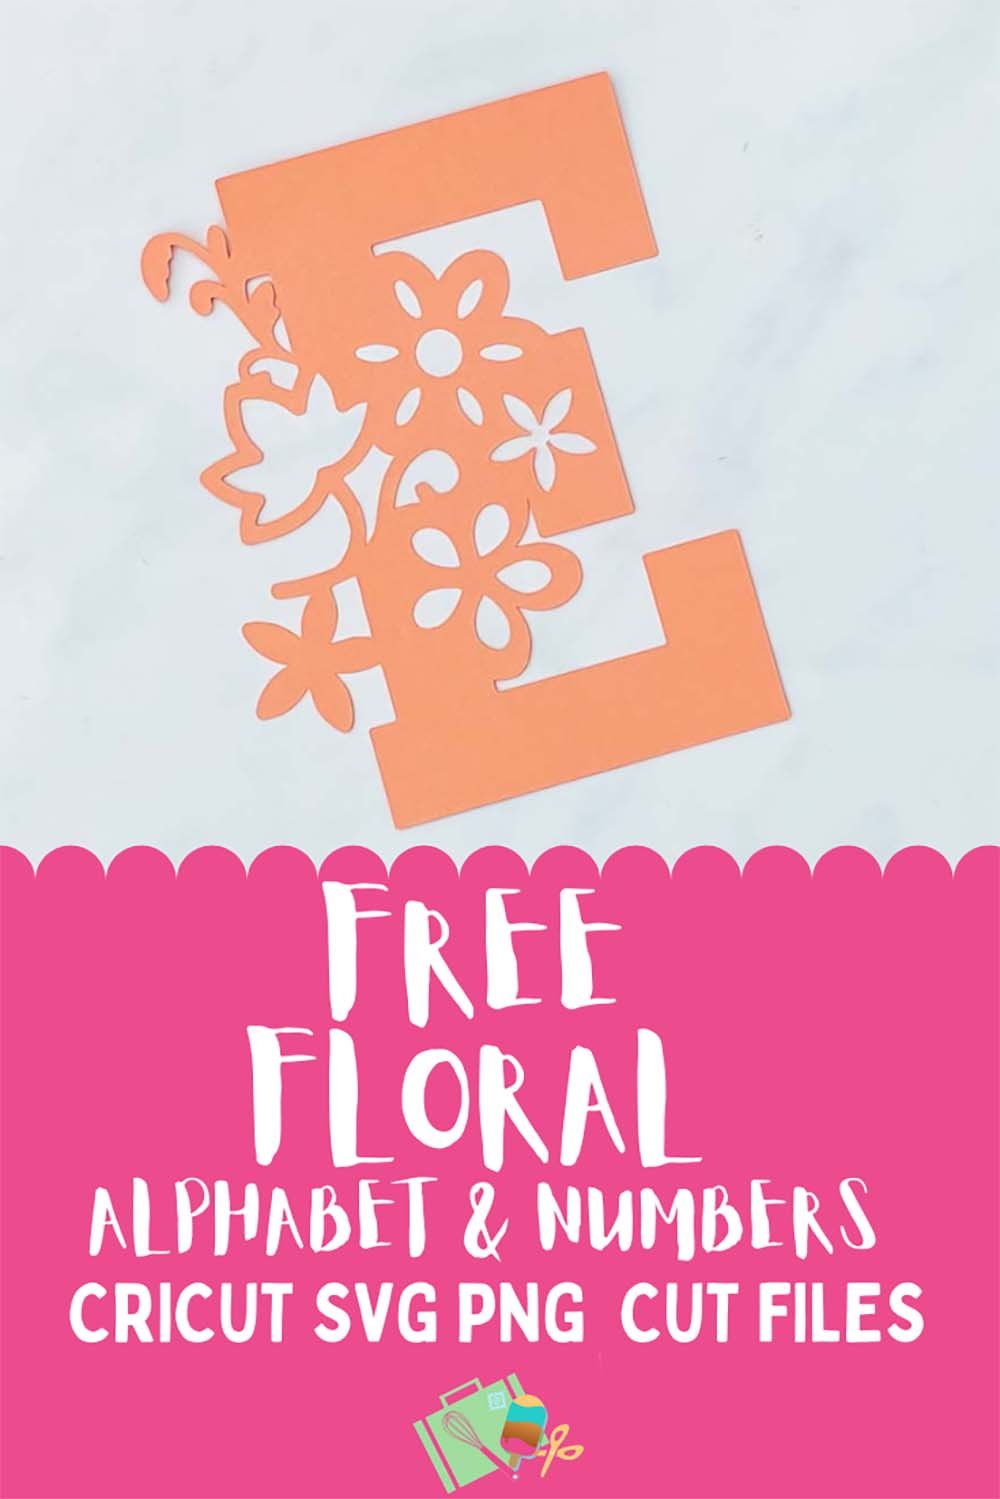 Free floral alphabet SVG PNG For Cricut Crafting and Scrapbooking-2